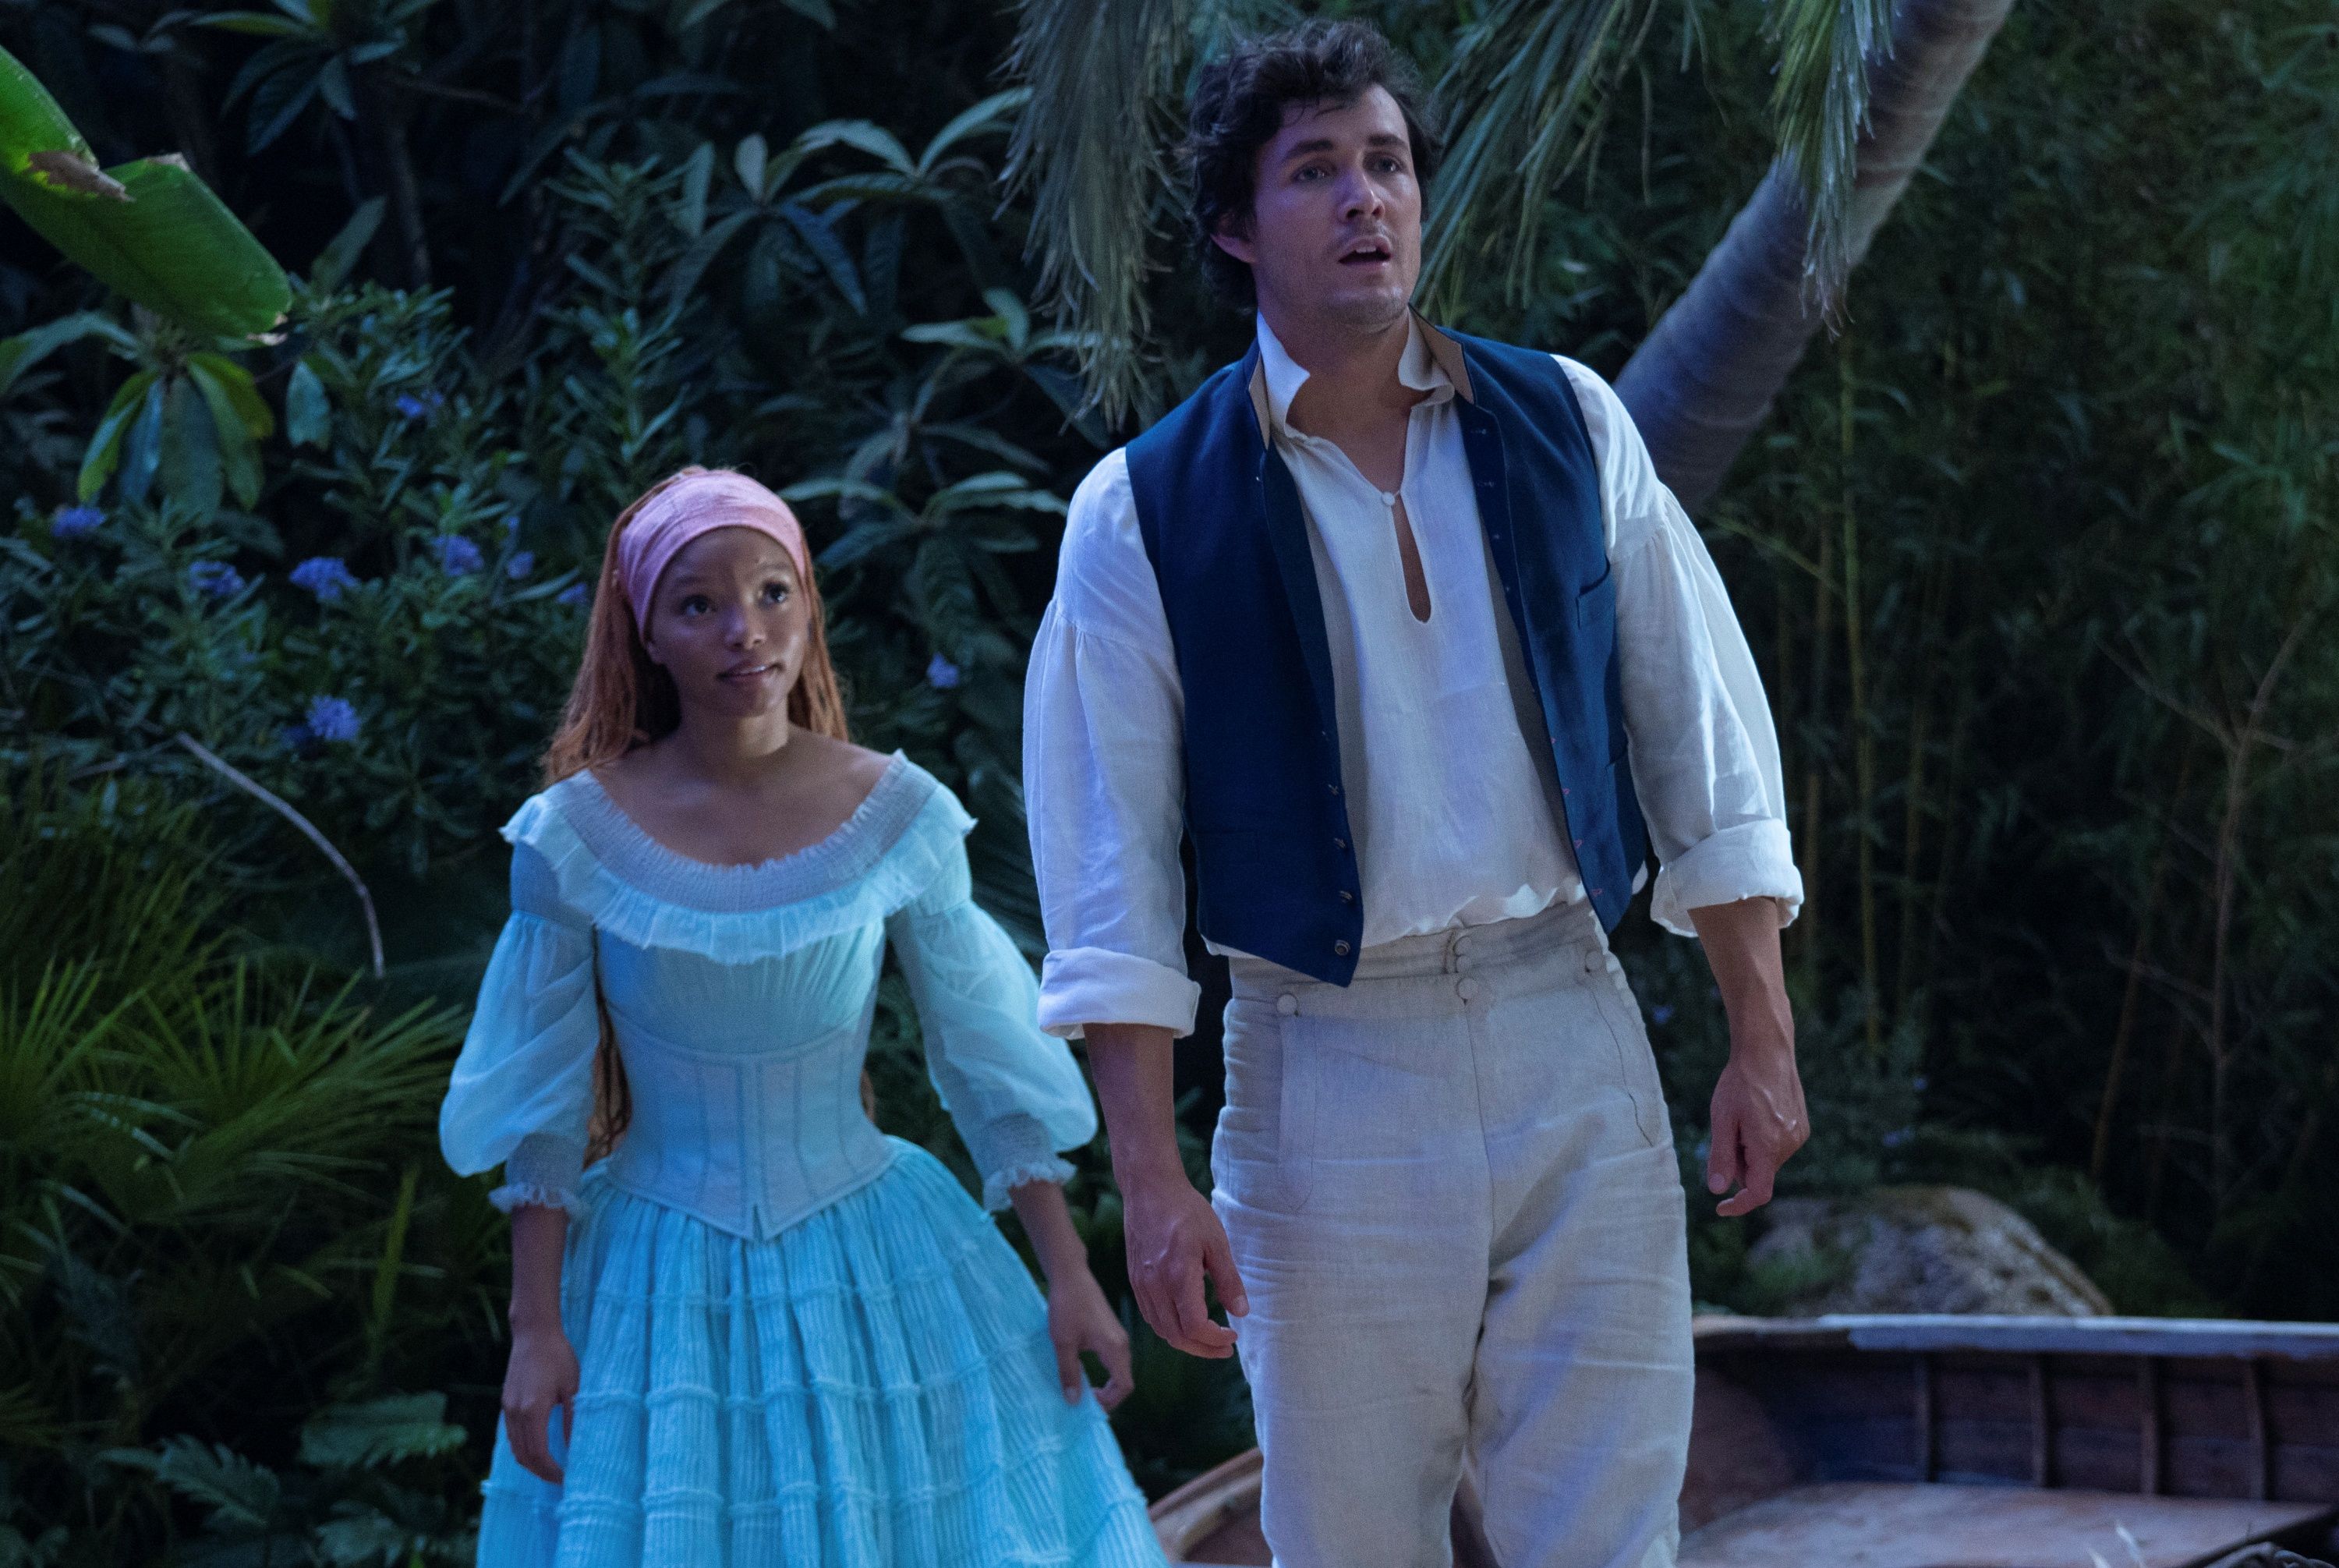 Halle Bailey as Ariel and Jonah Hauer-King as Prince Eric in The Little Mermaid